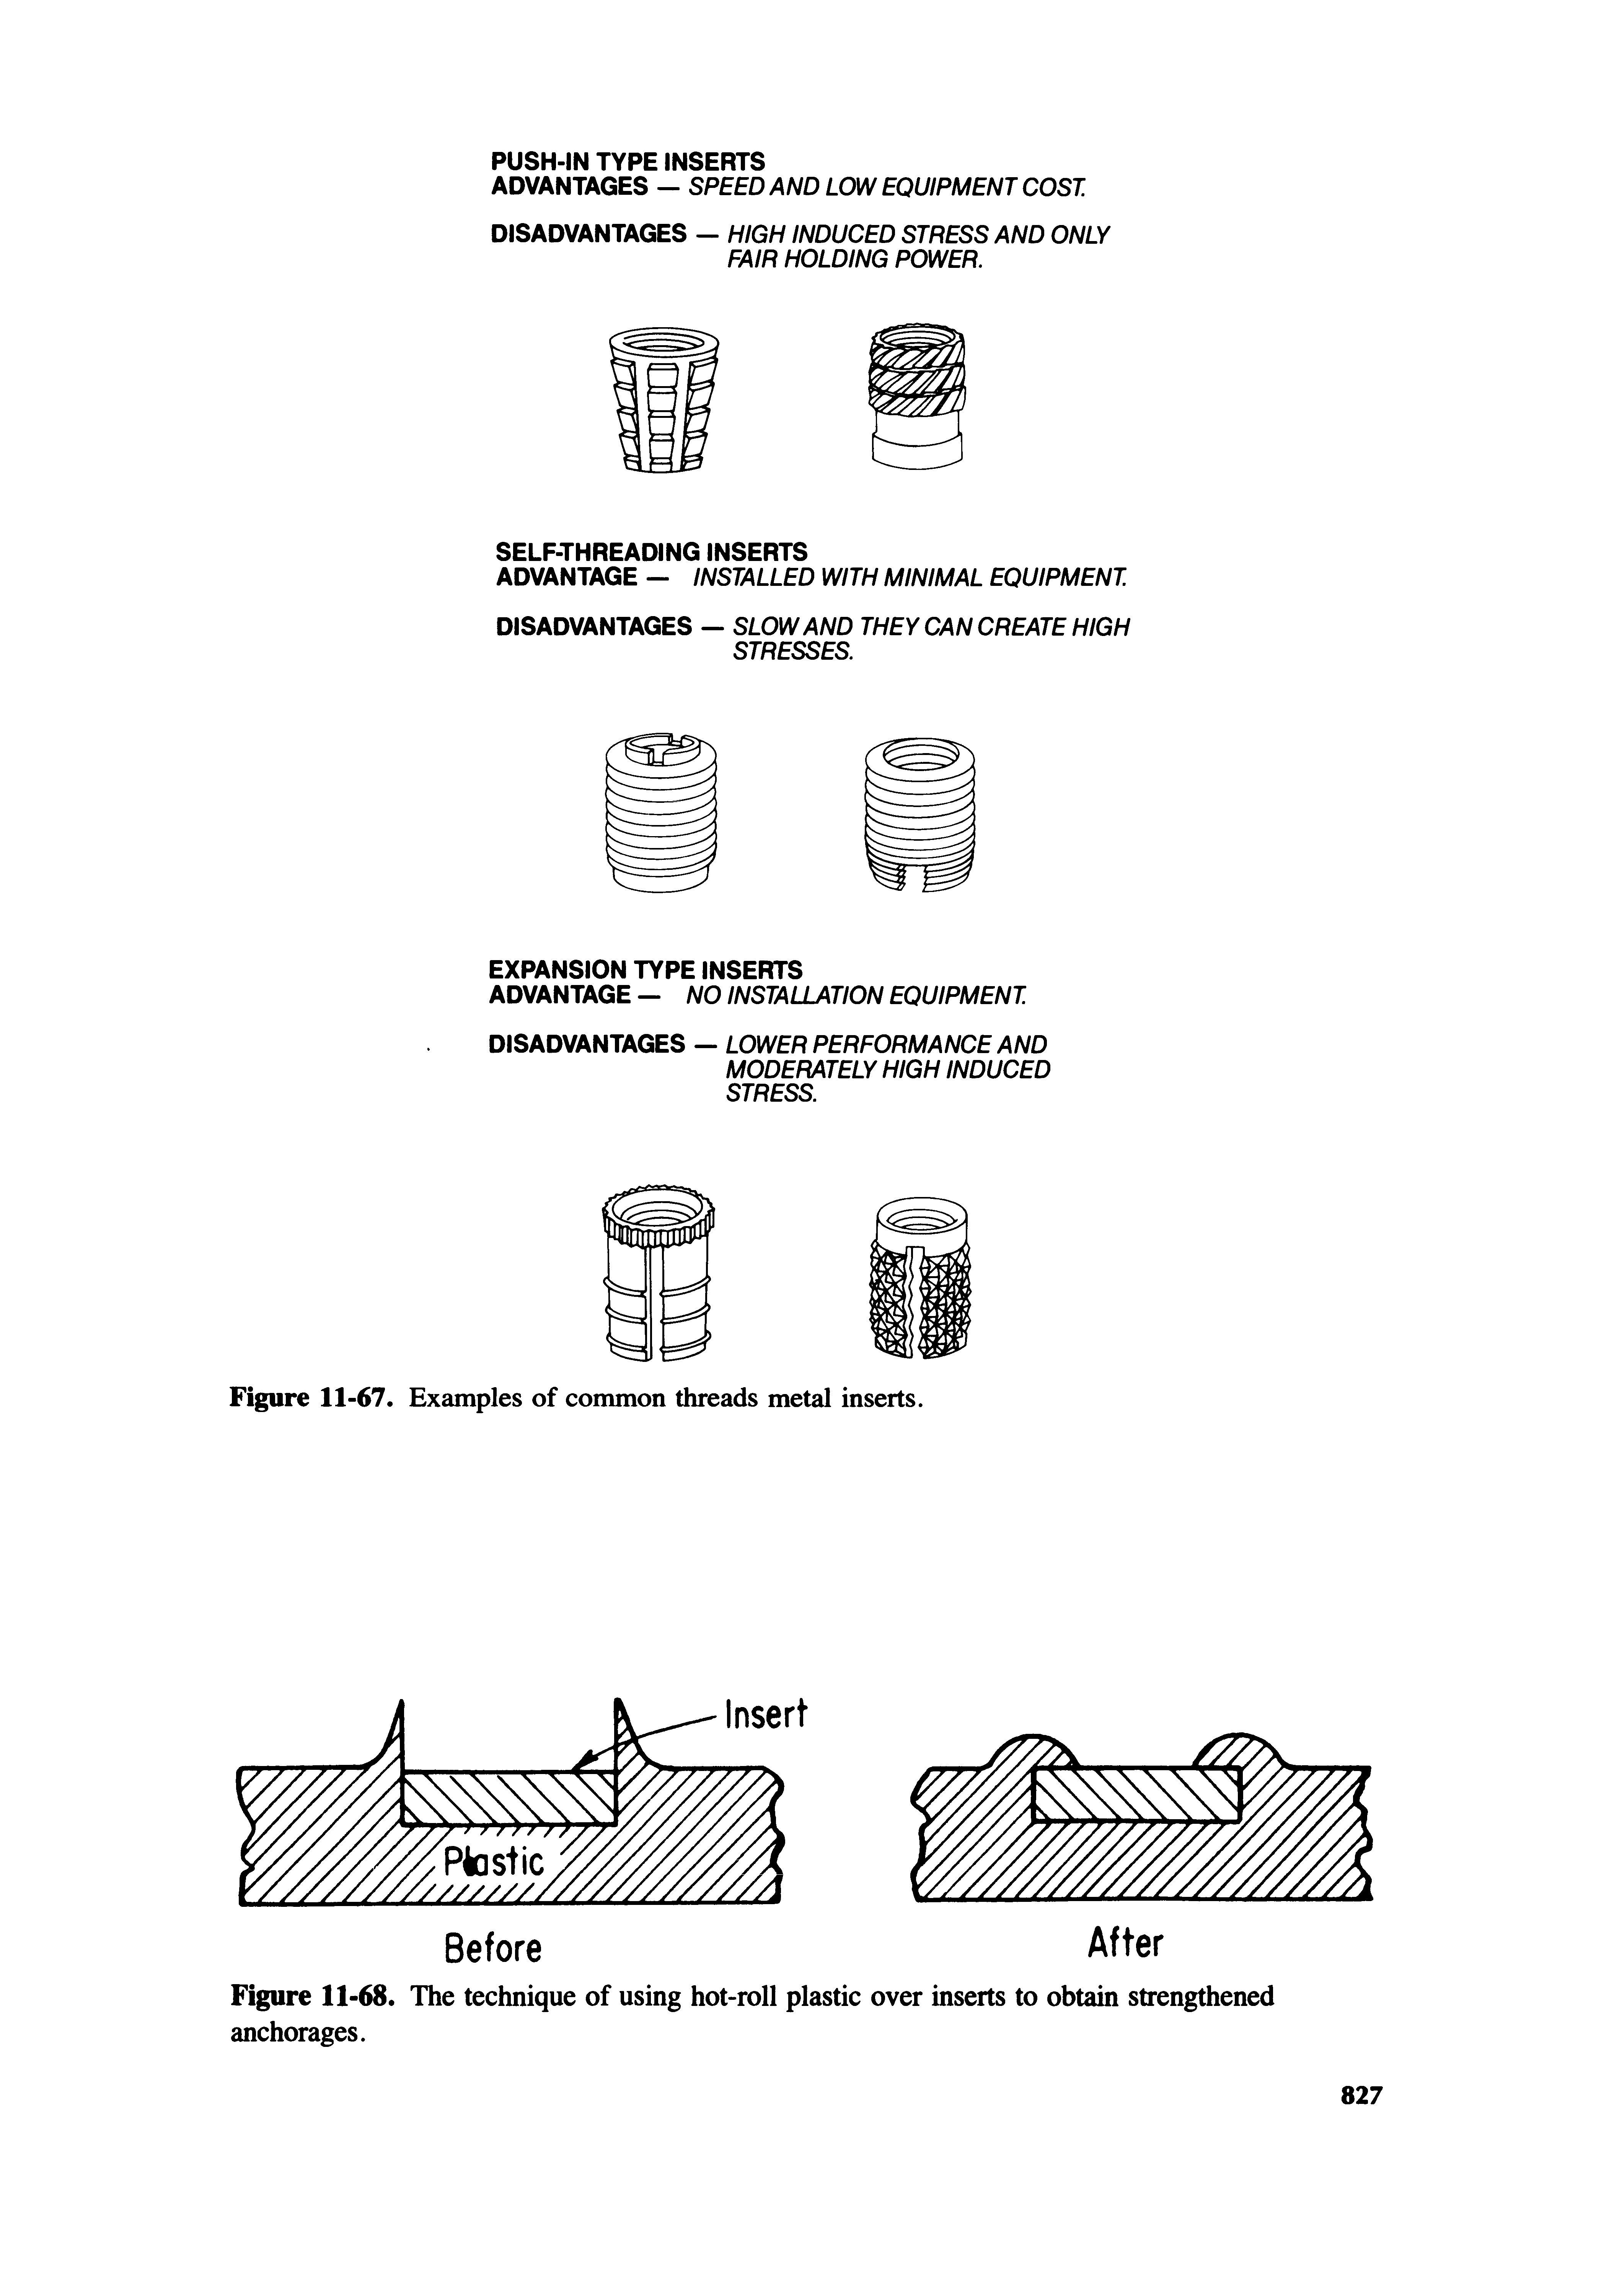 Figure 11-67. Examples of common threads metal inserts.